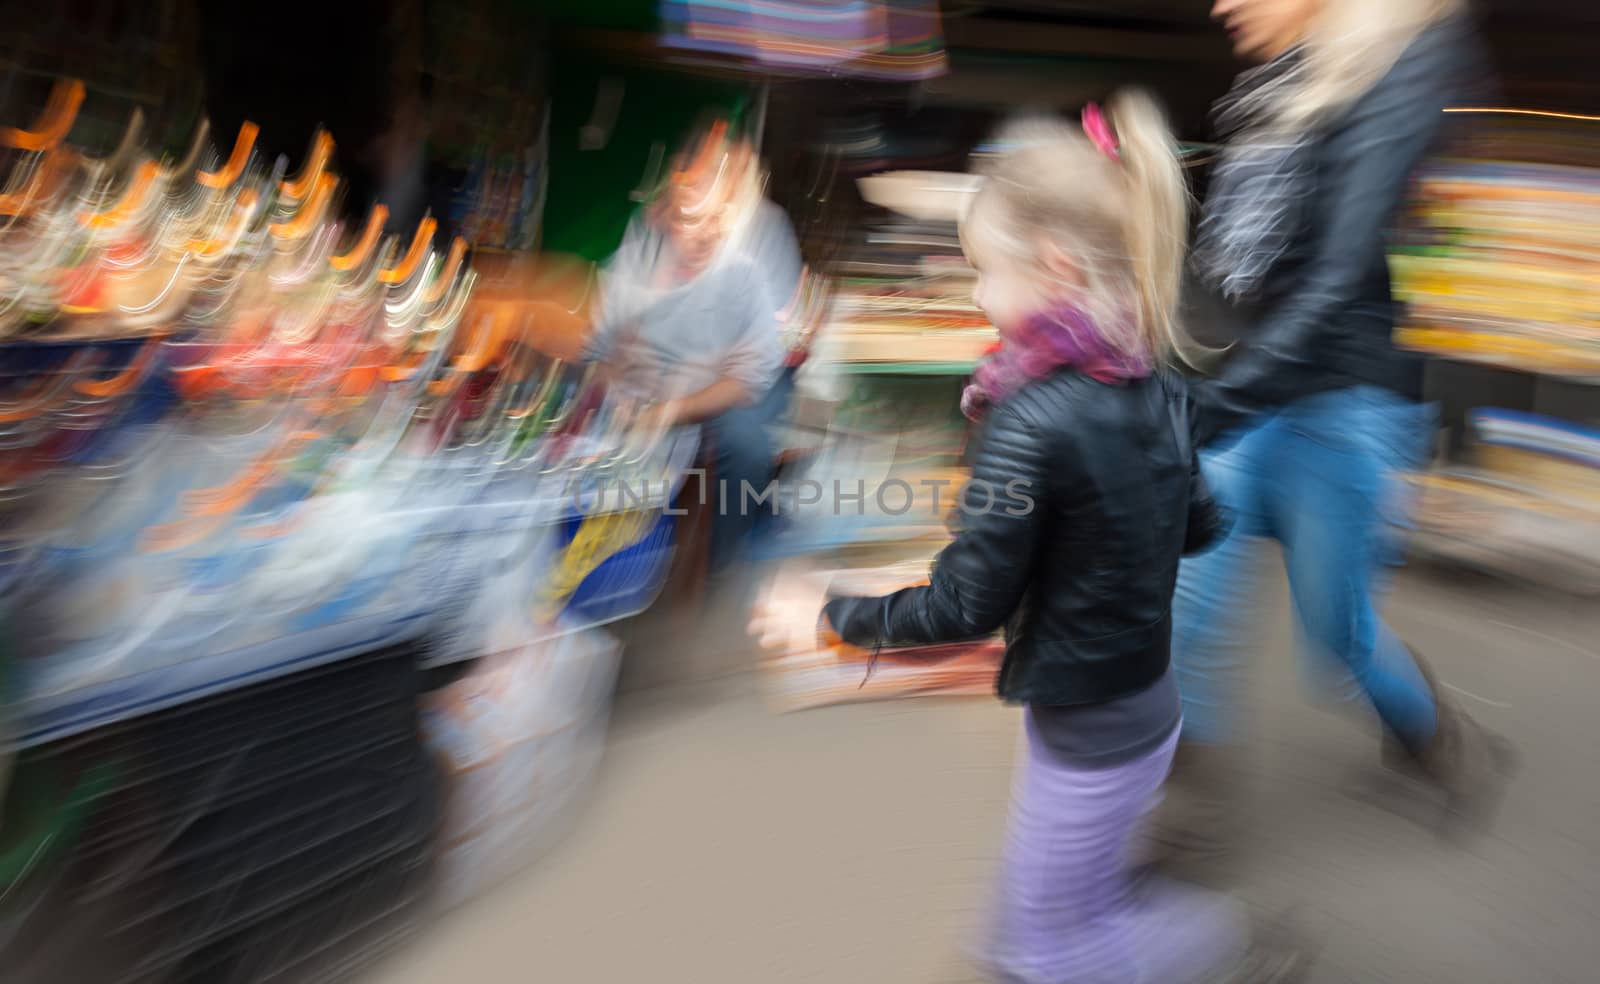 Mom and daughter purchased goods in the urban market. Intentional motion blur